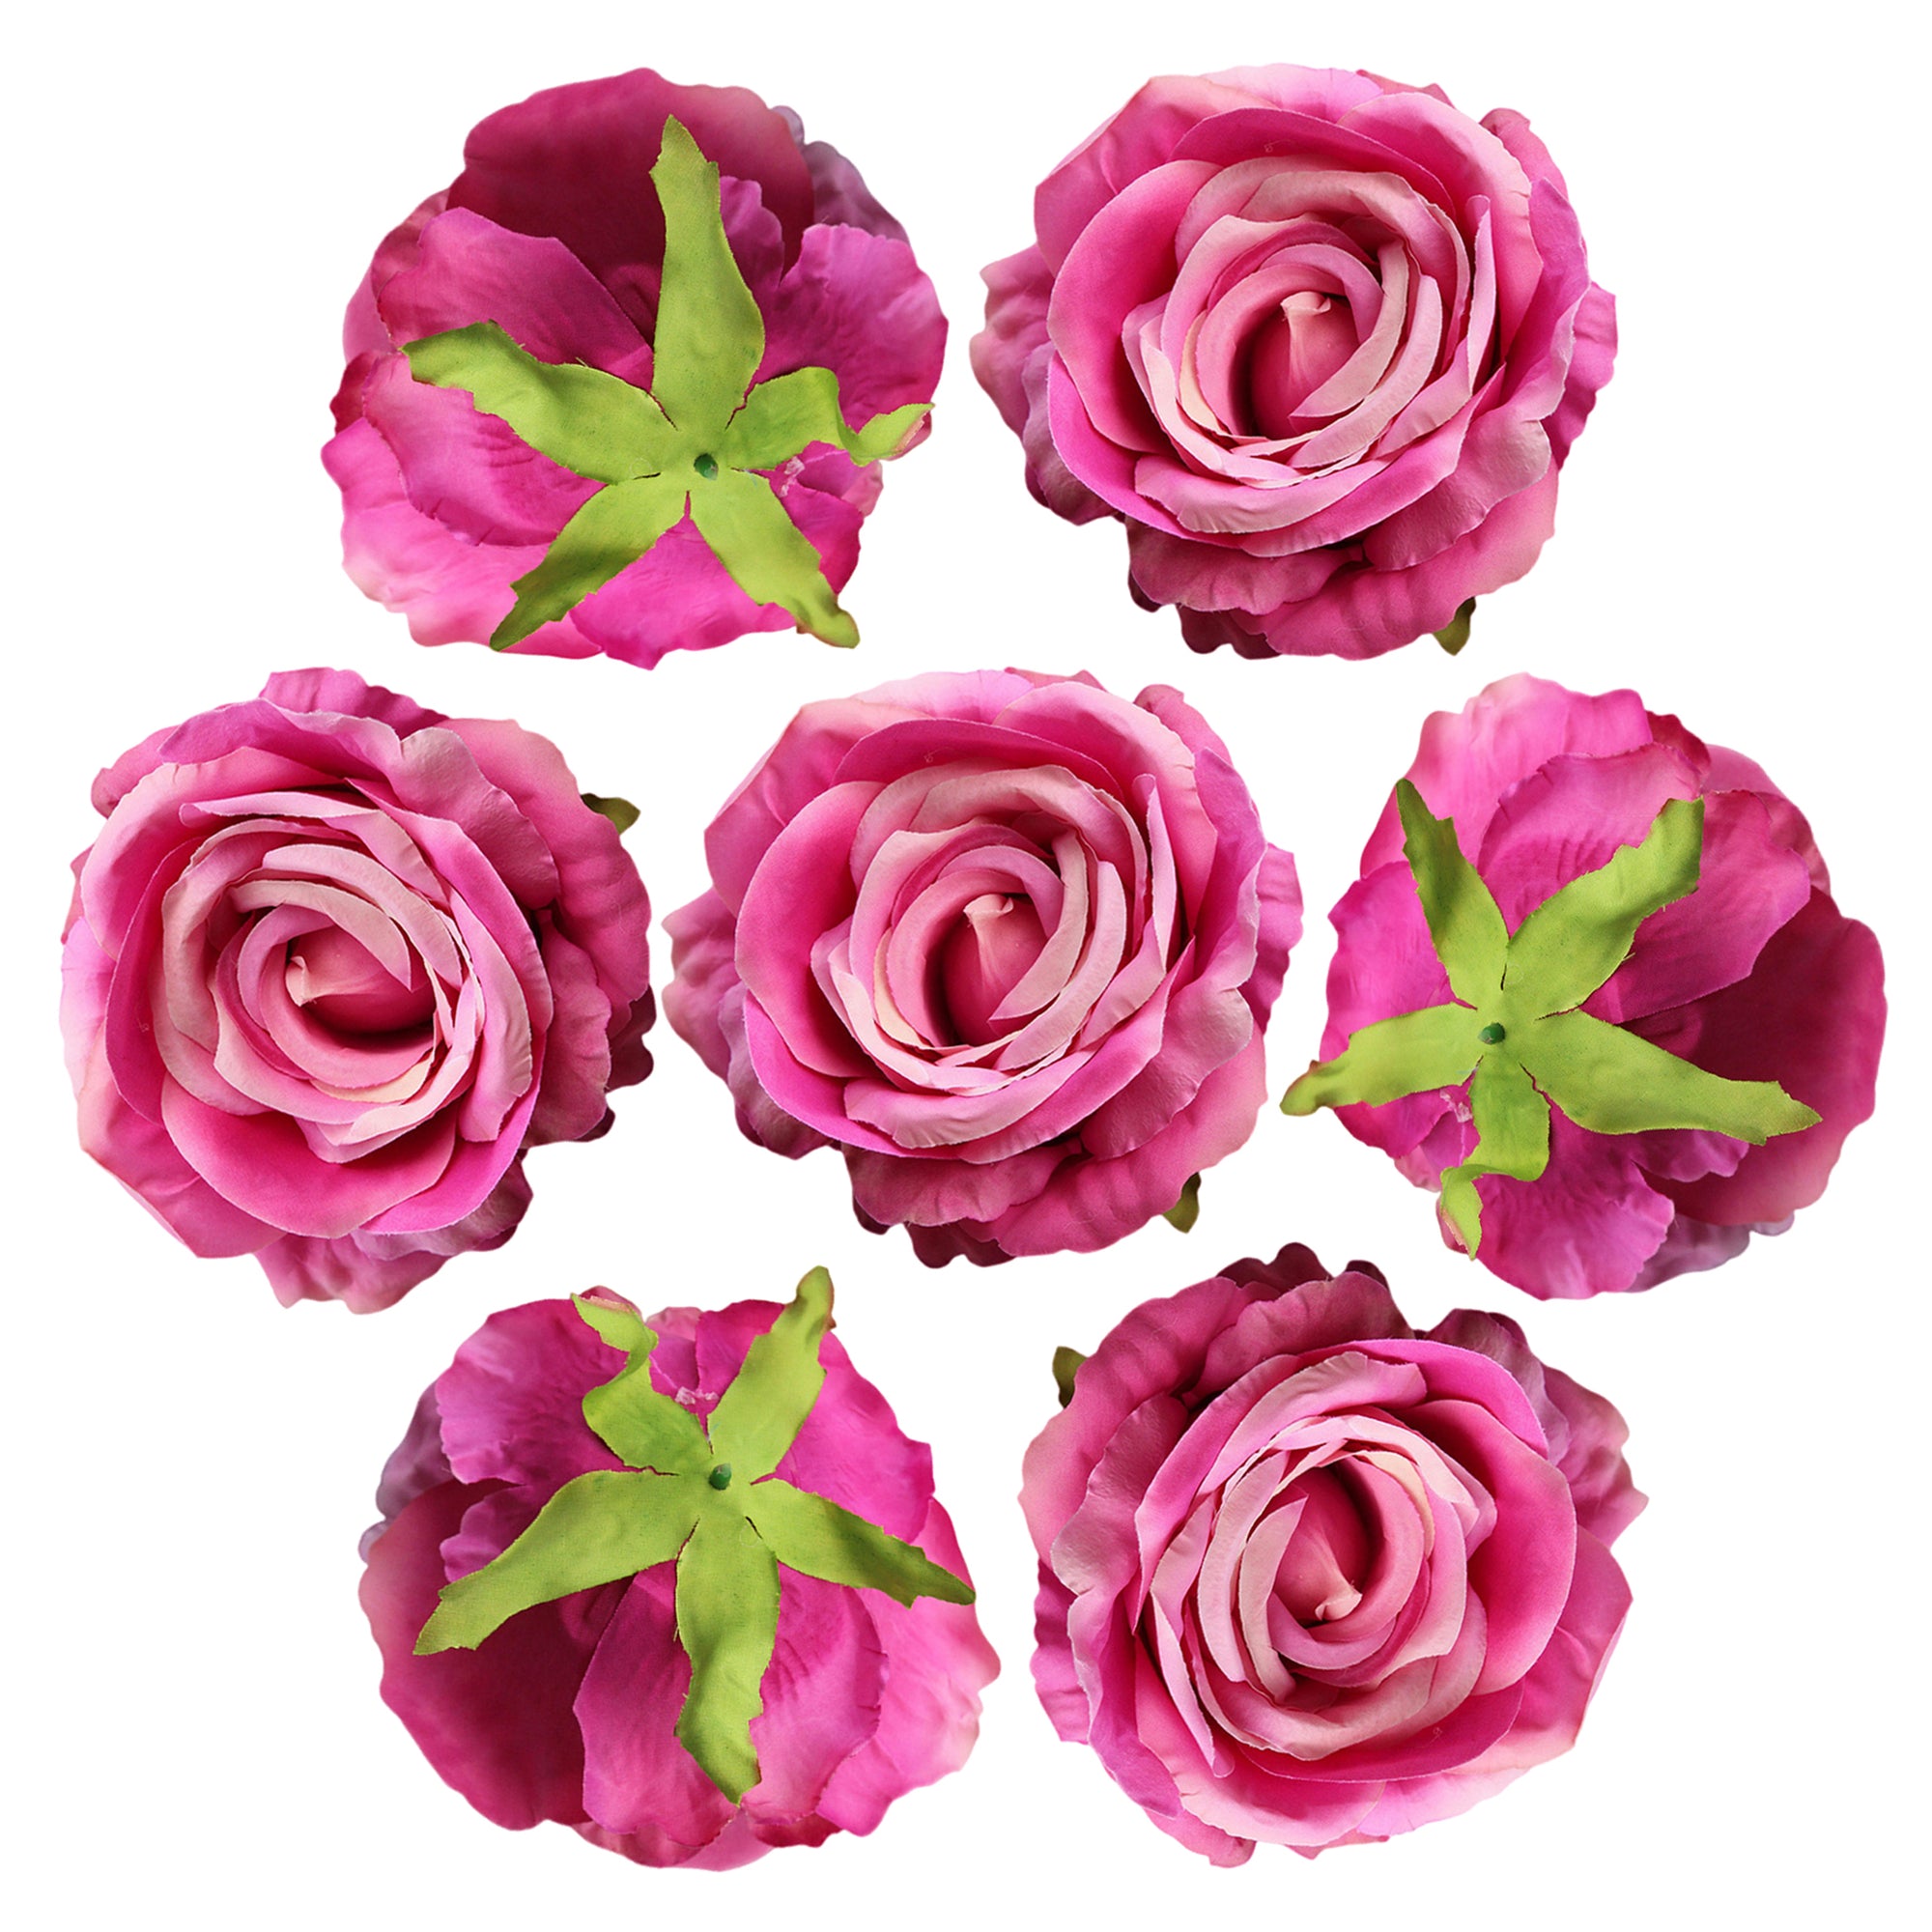 Wholesale Large Roses Silk Flowers 4-5 inch